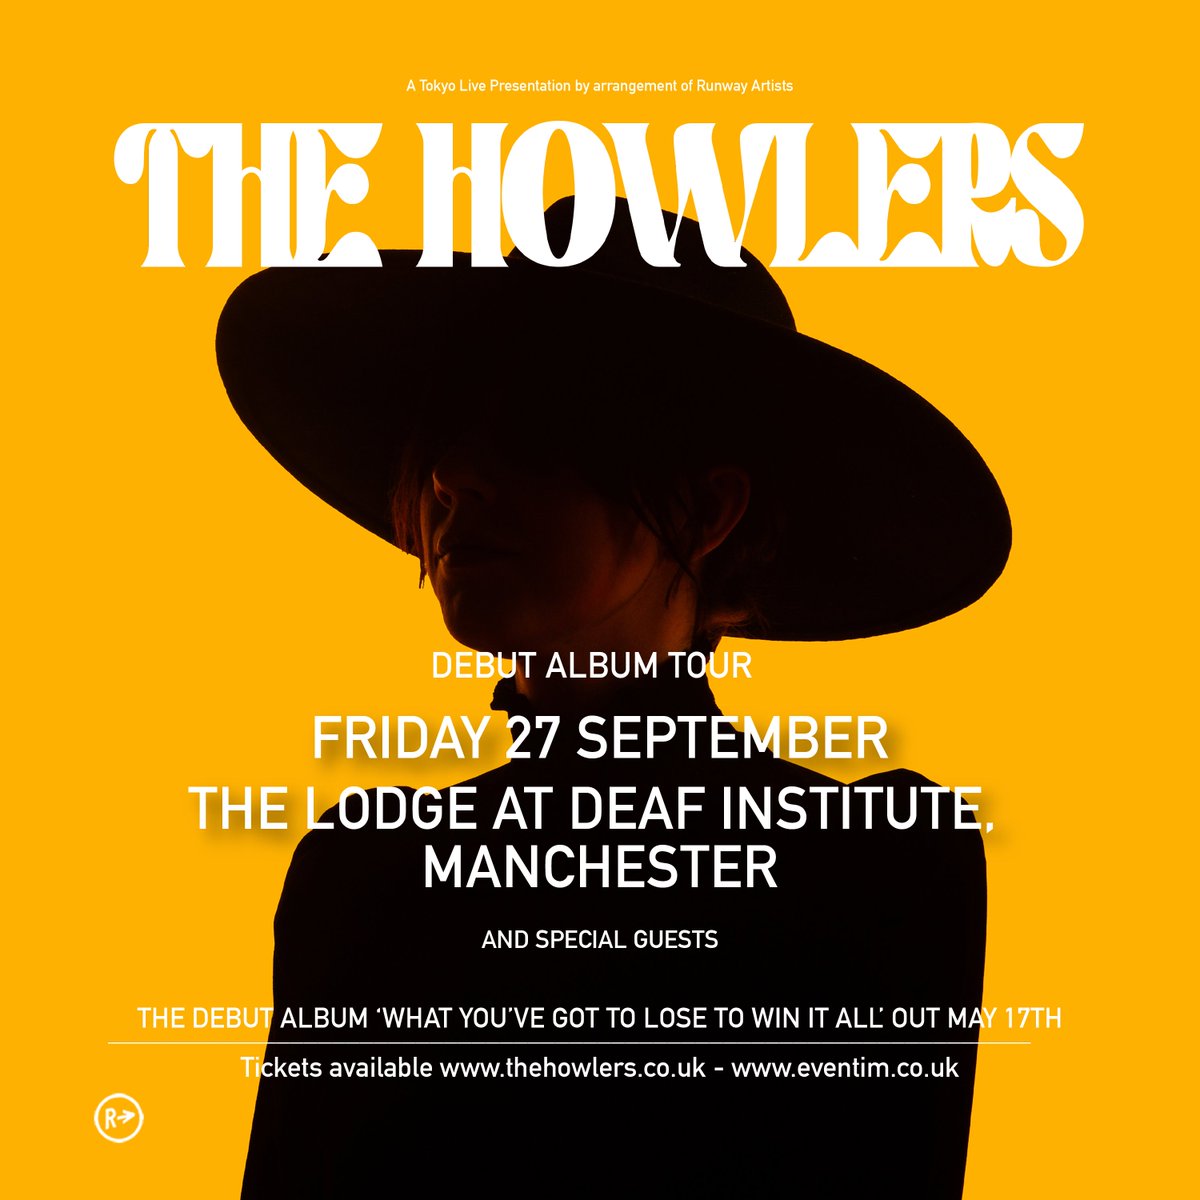 ON SALE | The East London trio with an epic debut album produced by Black Honey. Excited to announced that @thehowlersuk join us in celebration of its release on 27th Sept in The Lodge 📷 TICKETS OUT NOW >> bit.ly/thehowlersMCR